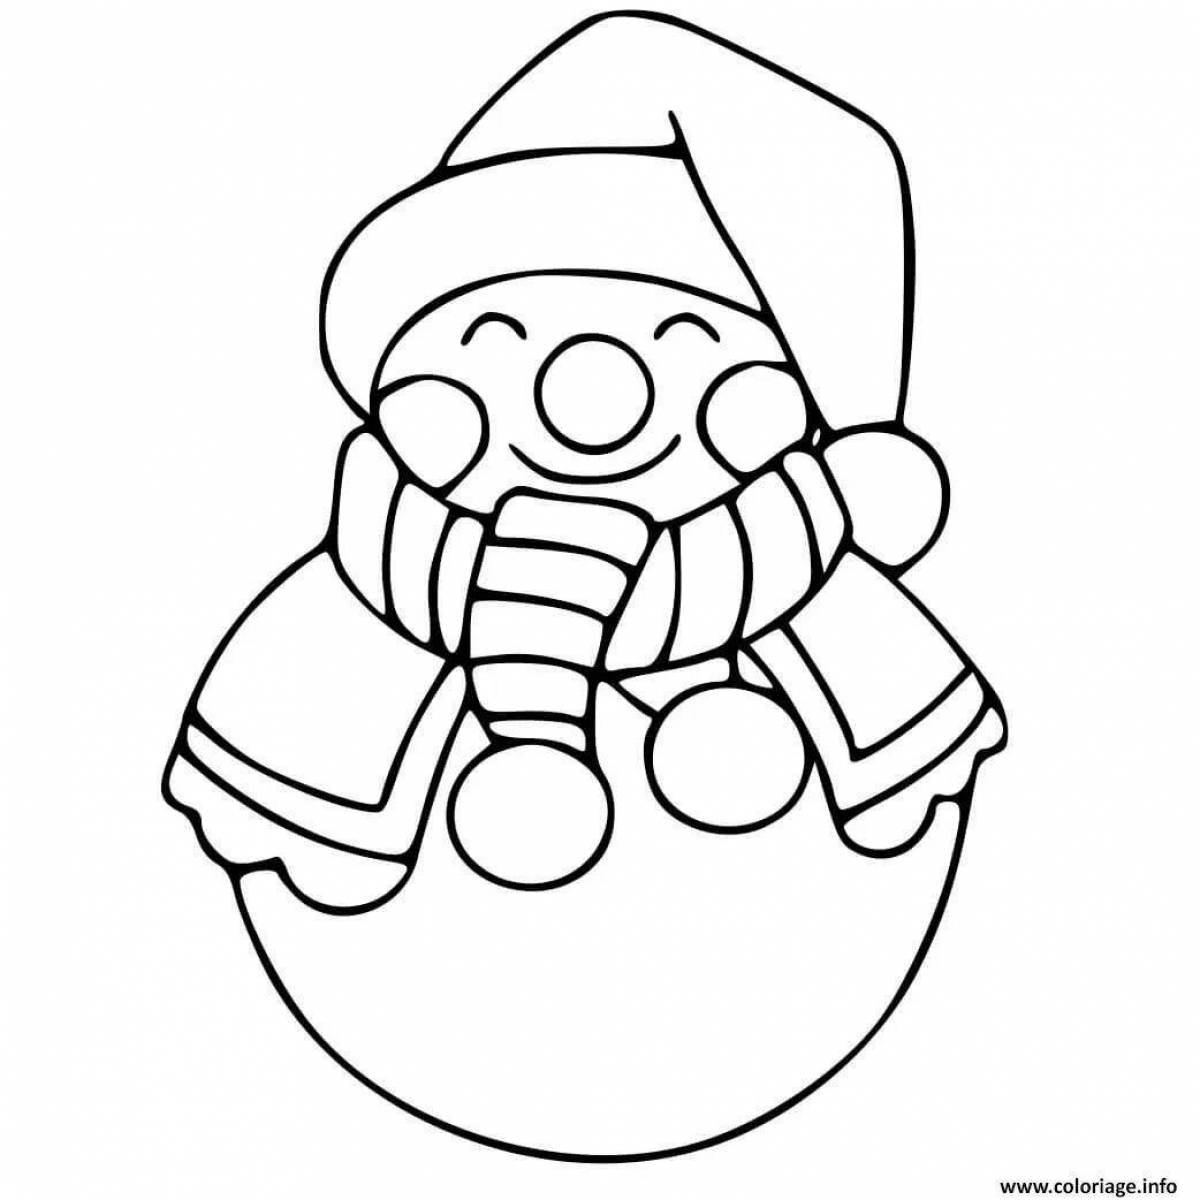 Glowing christmas simple coloring book